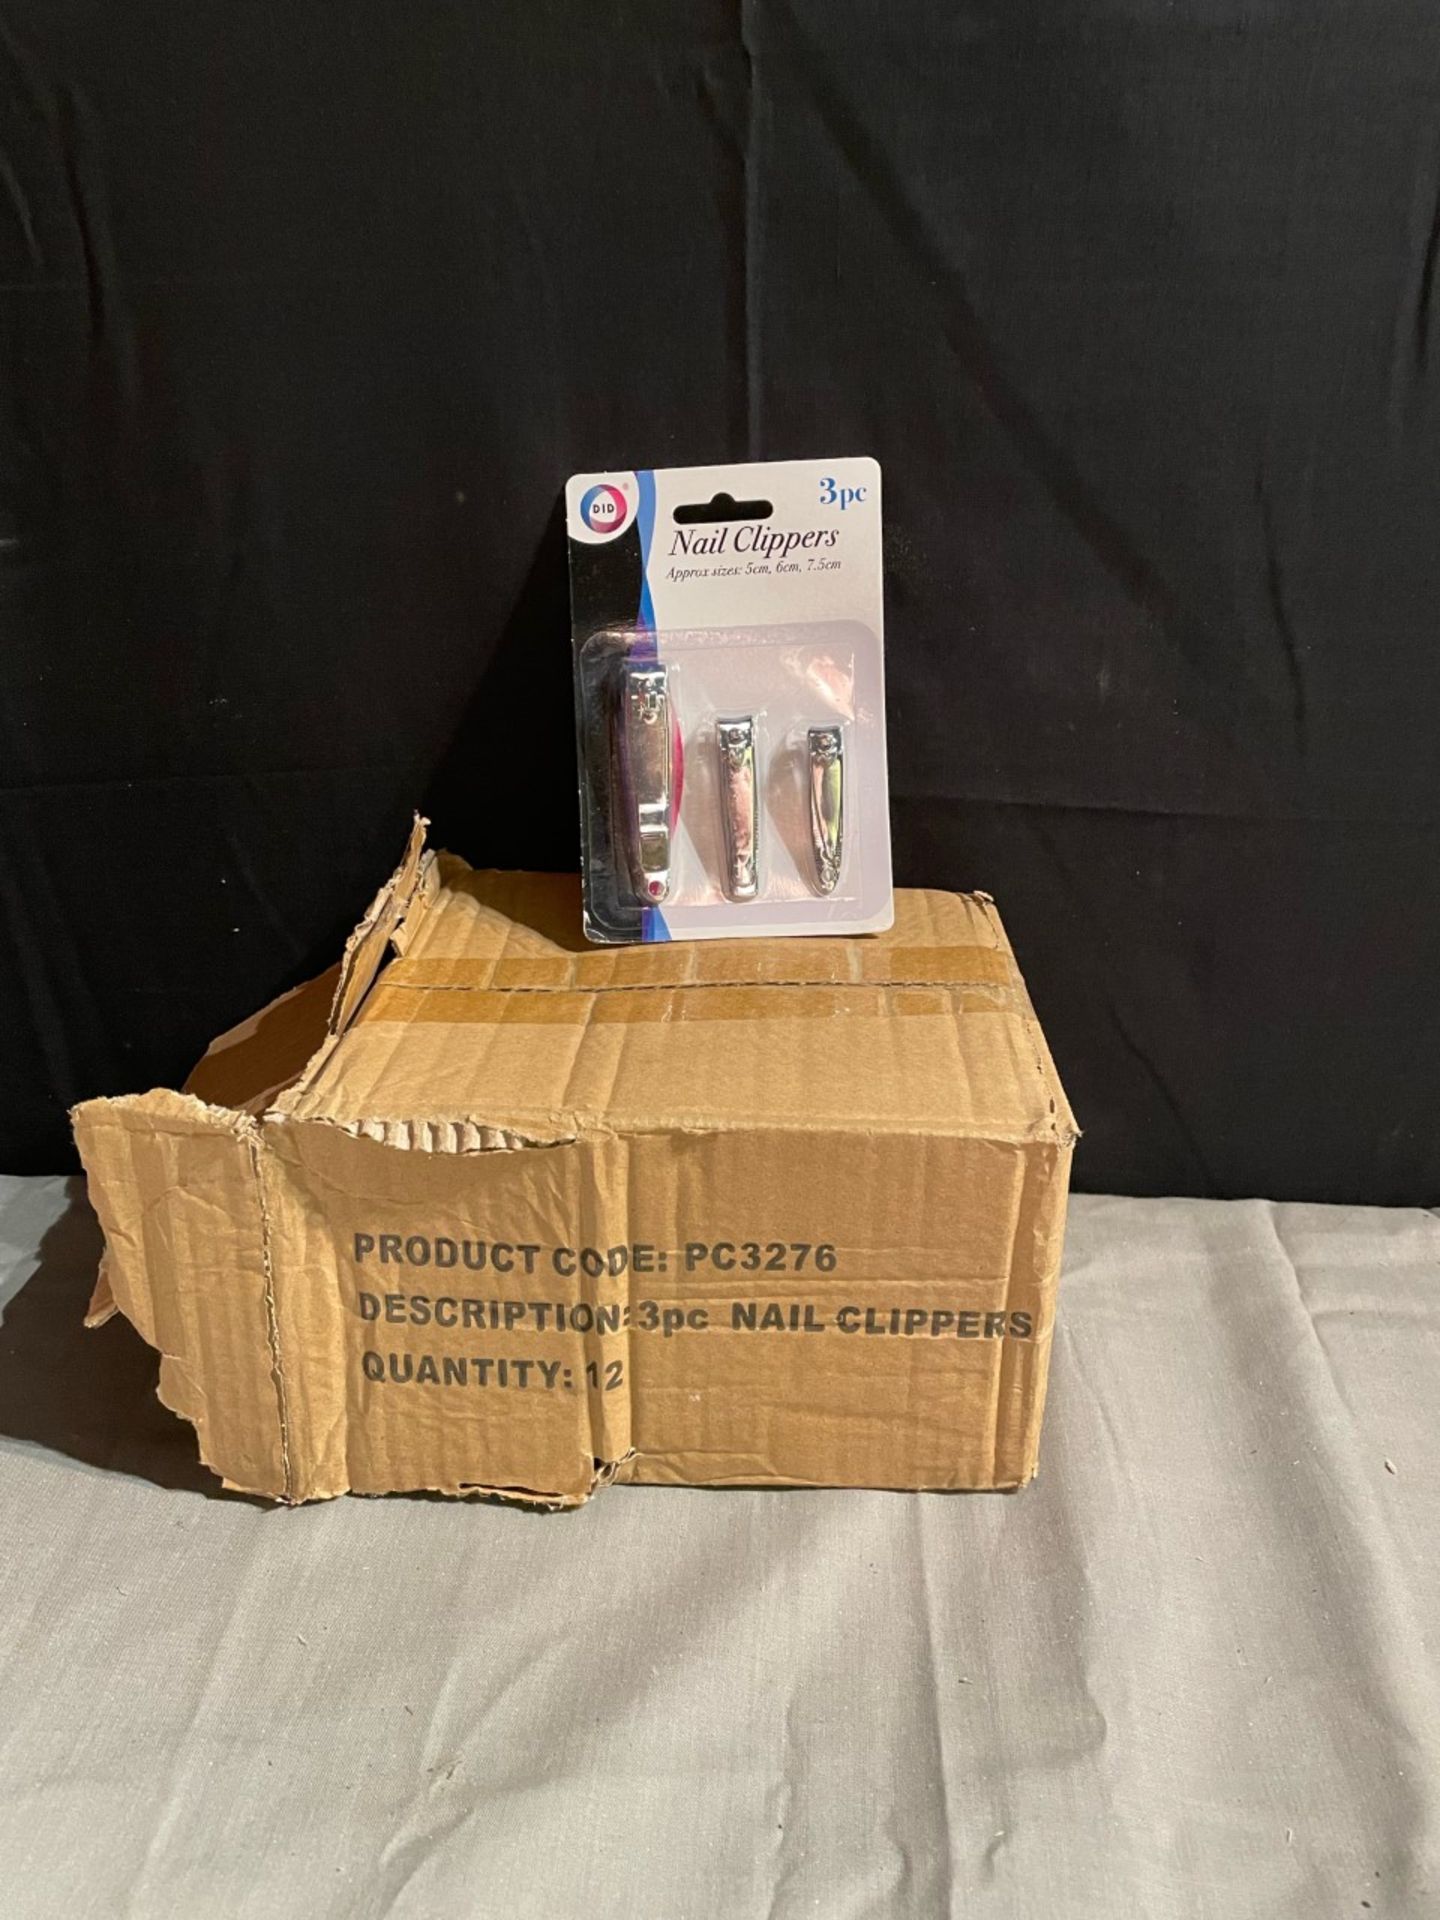 1x box of 3 piece nail clipper set. 10 units in box. New In packaging